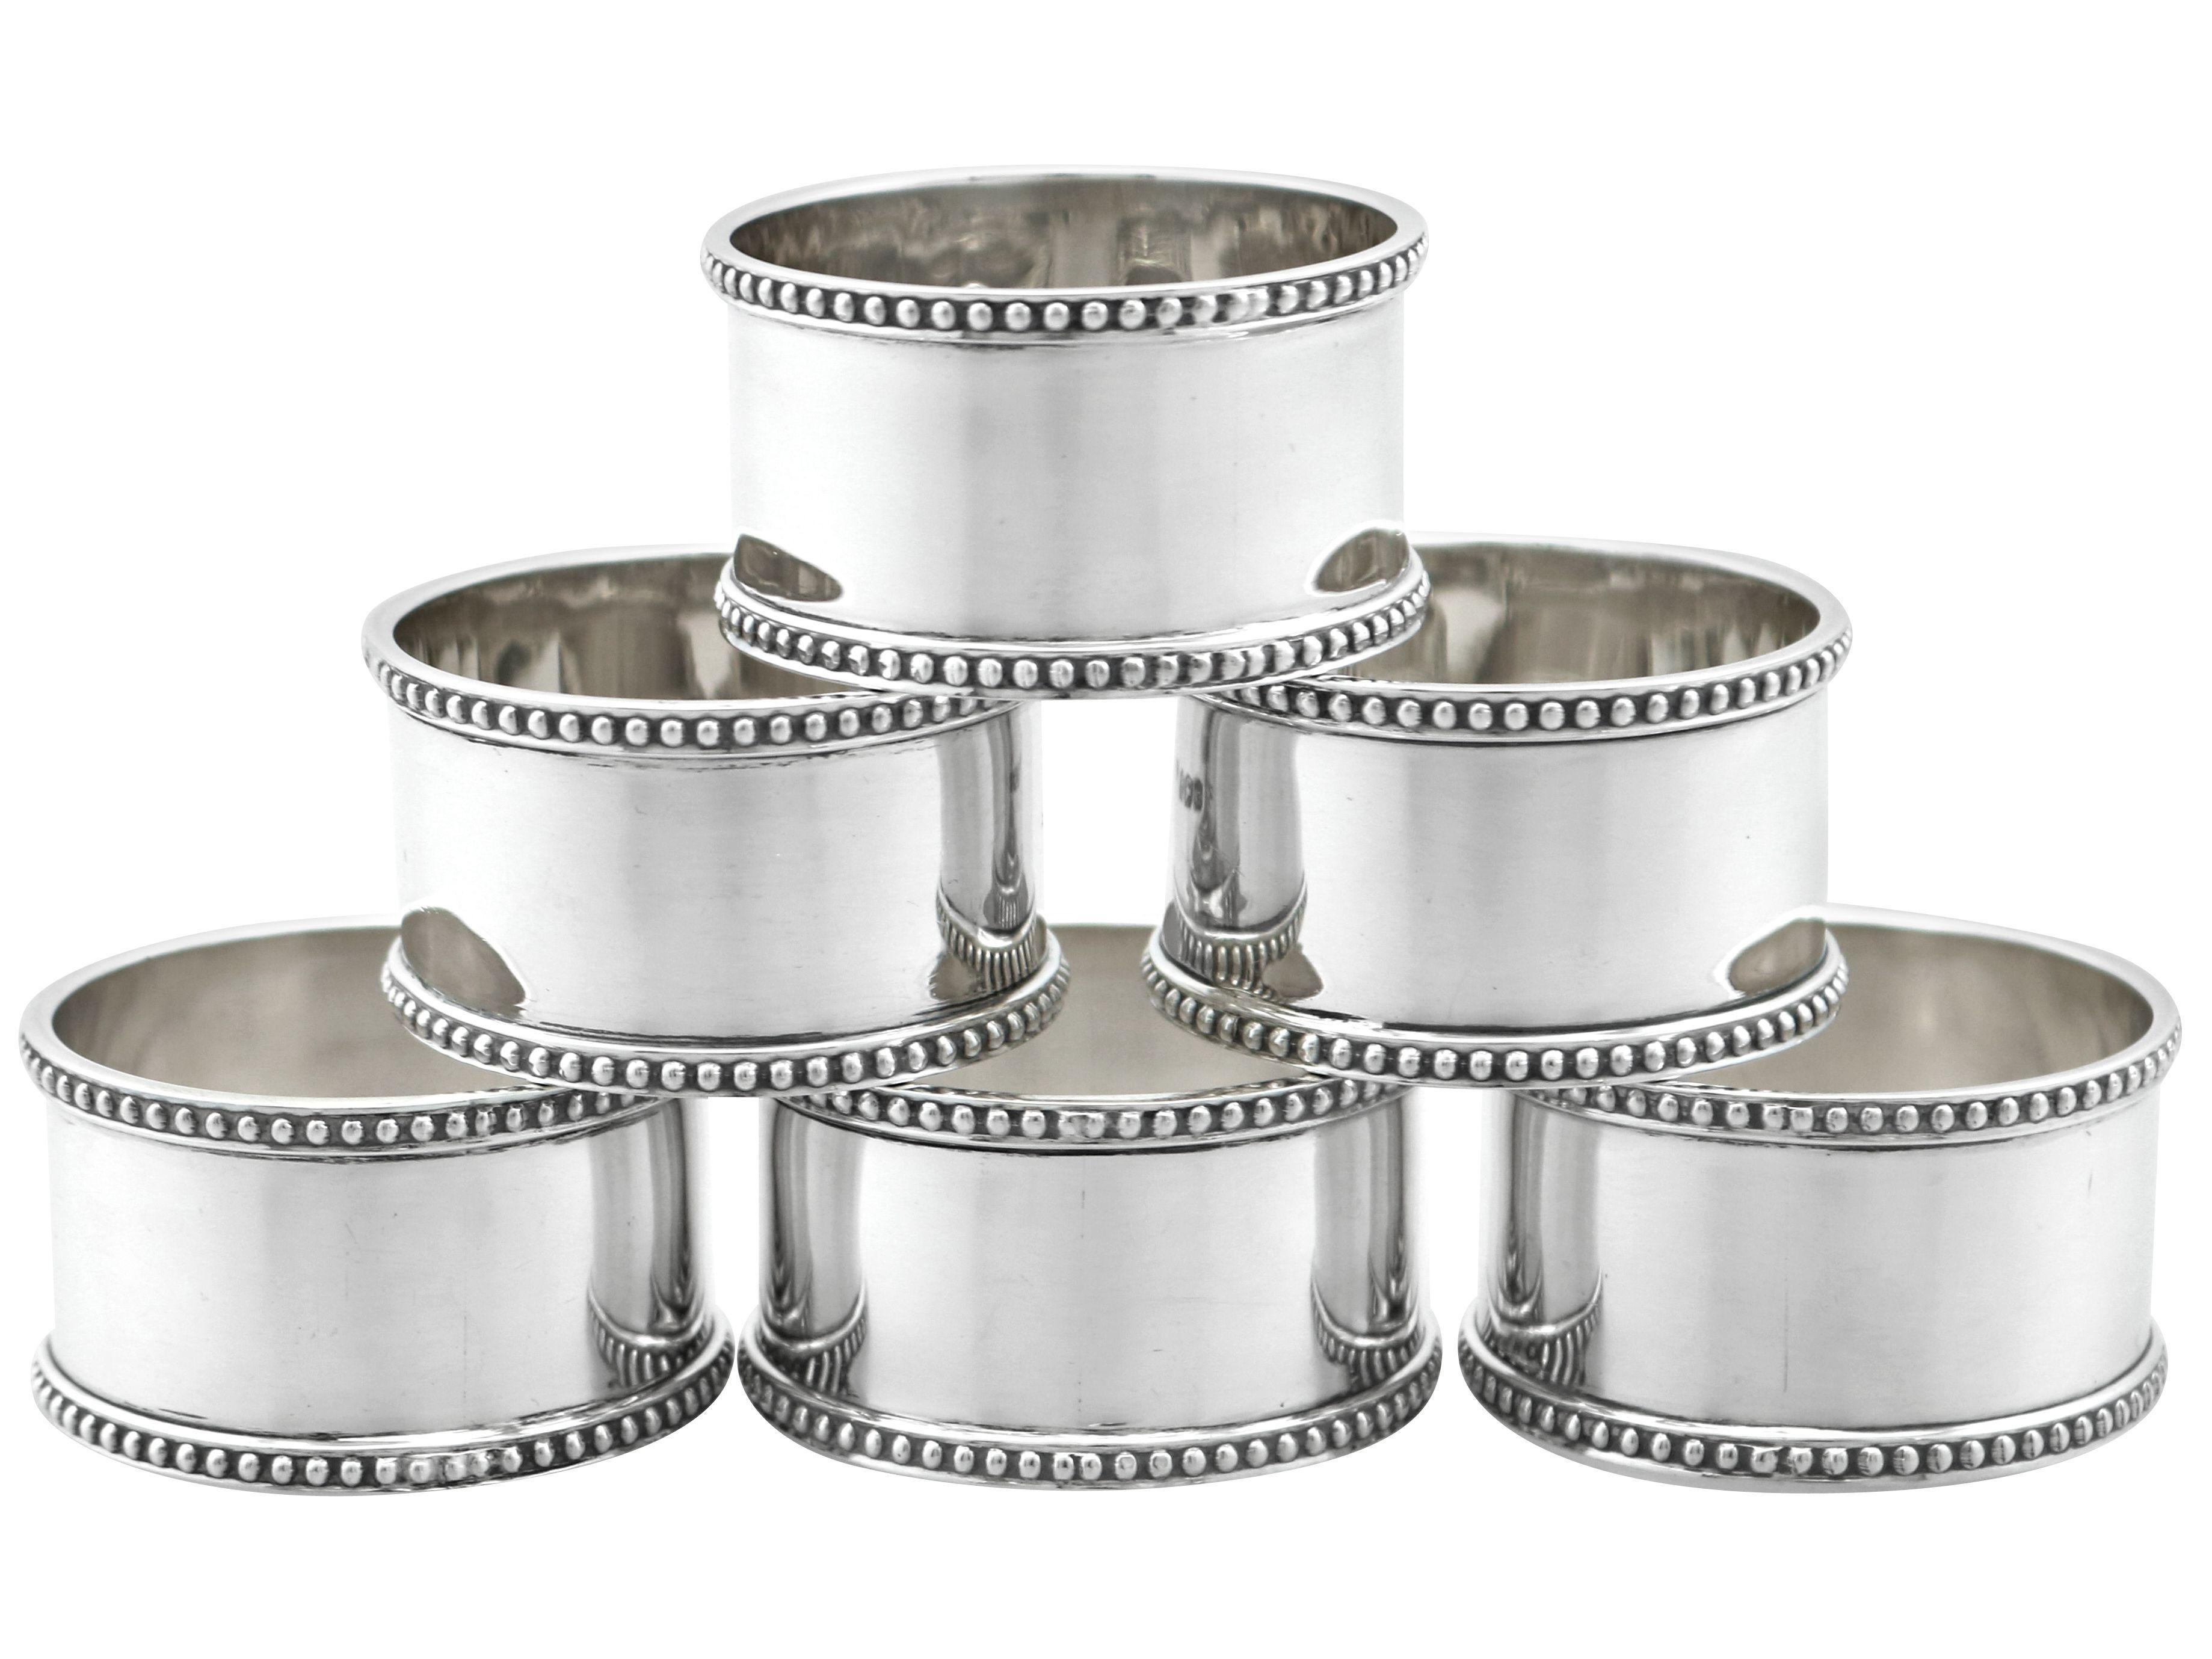 An exceptional, fine and impressive set of six antique George V sterling silver napkin rings - boxed; an addition to our dining silverware collection

This exceptional set of antique George V silver napkin rings consists of six napkin rings, each